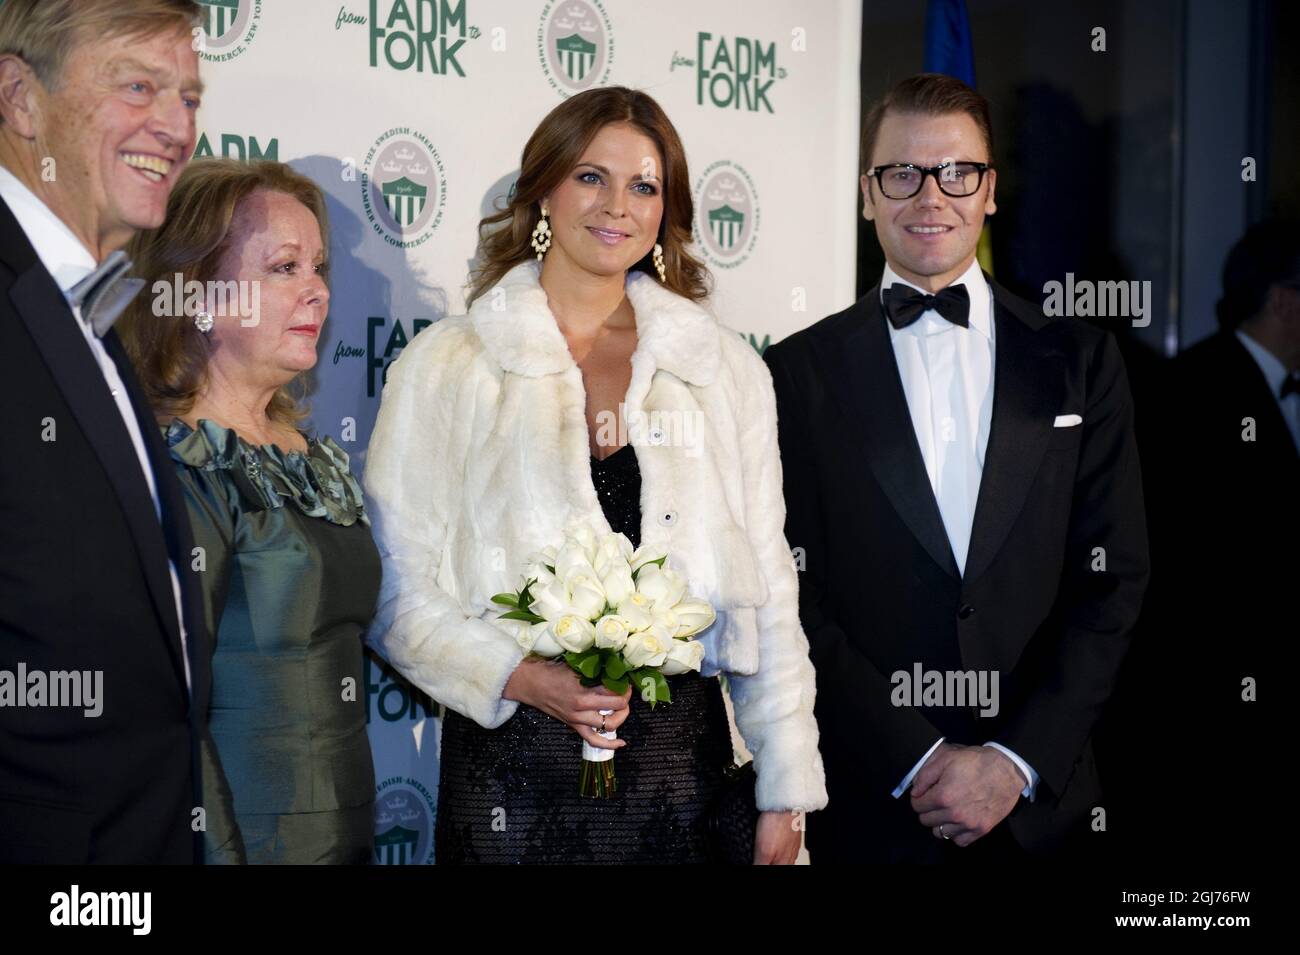 NEW YORK 20111101 RenÃ©e Lundholm, head of the Swedish-American Chamber of Commerce and Chairman Henry E. Gooss welcome Sweden's Princess Madeleine and Prince Daniel to a Royal Gala Award Dinner where the SACC New York-Deloitte Green Award will be presented to a Swedish company on the vanguard of sustainable food development. Photo: Jessica Gow / SCANPIX / code 10070 Stock Photo